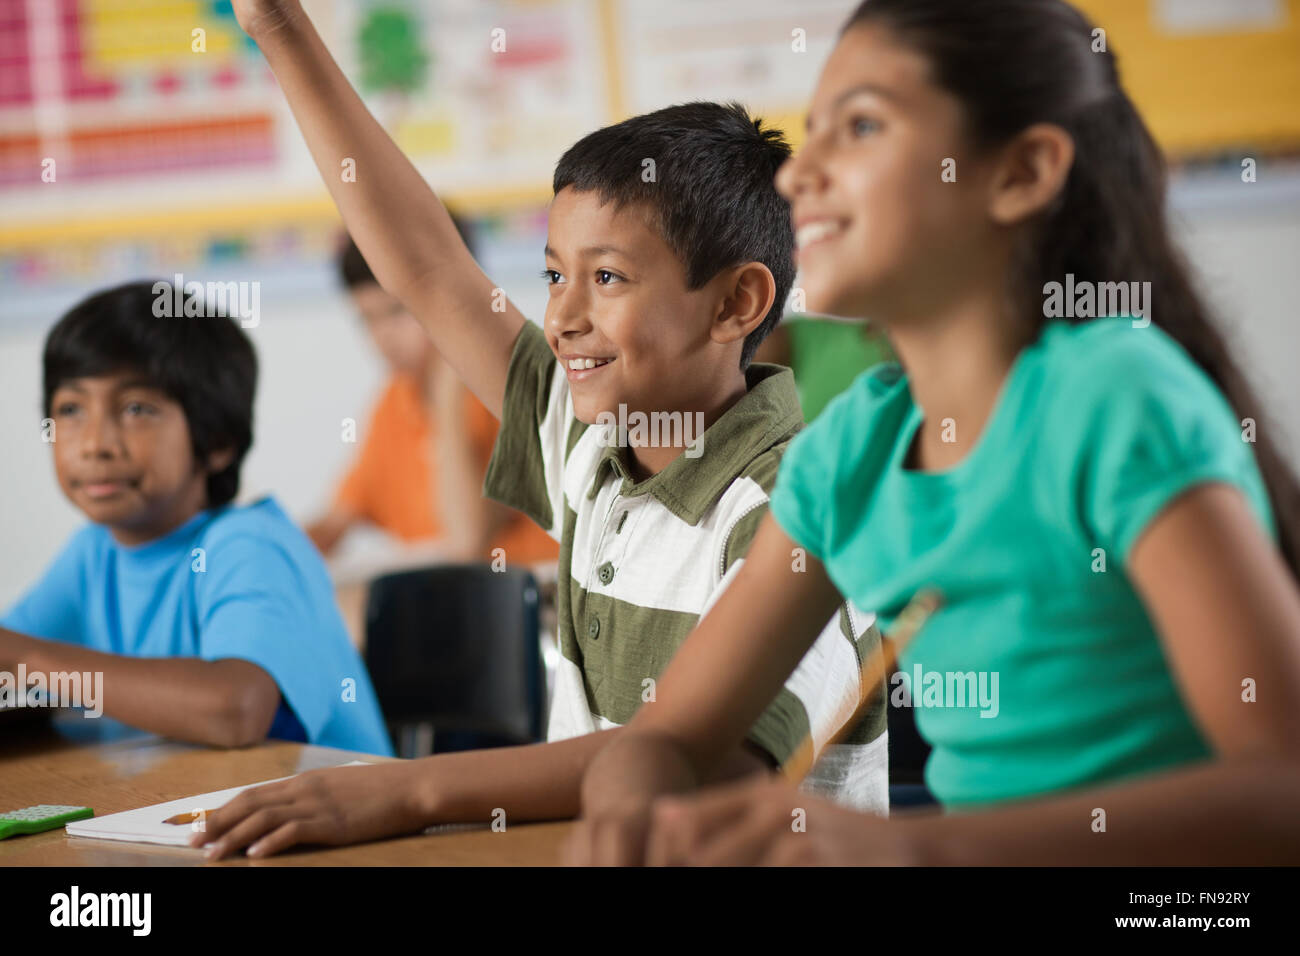 A group of young girls and boys in a classroom, classmates. A boy with his hand raised. Stock Photo